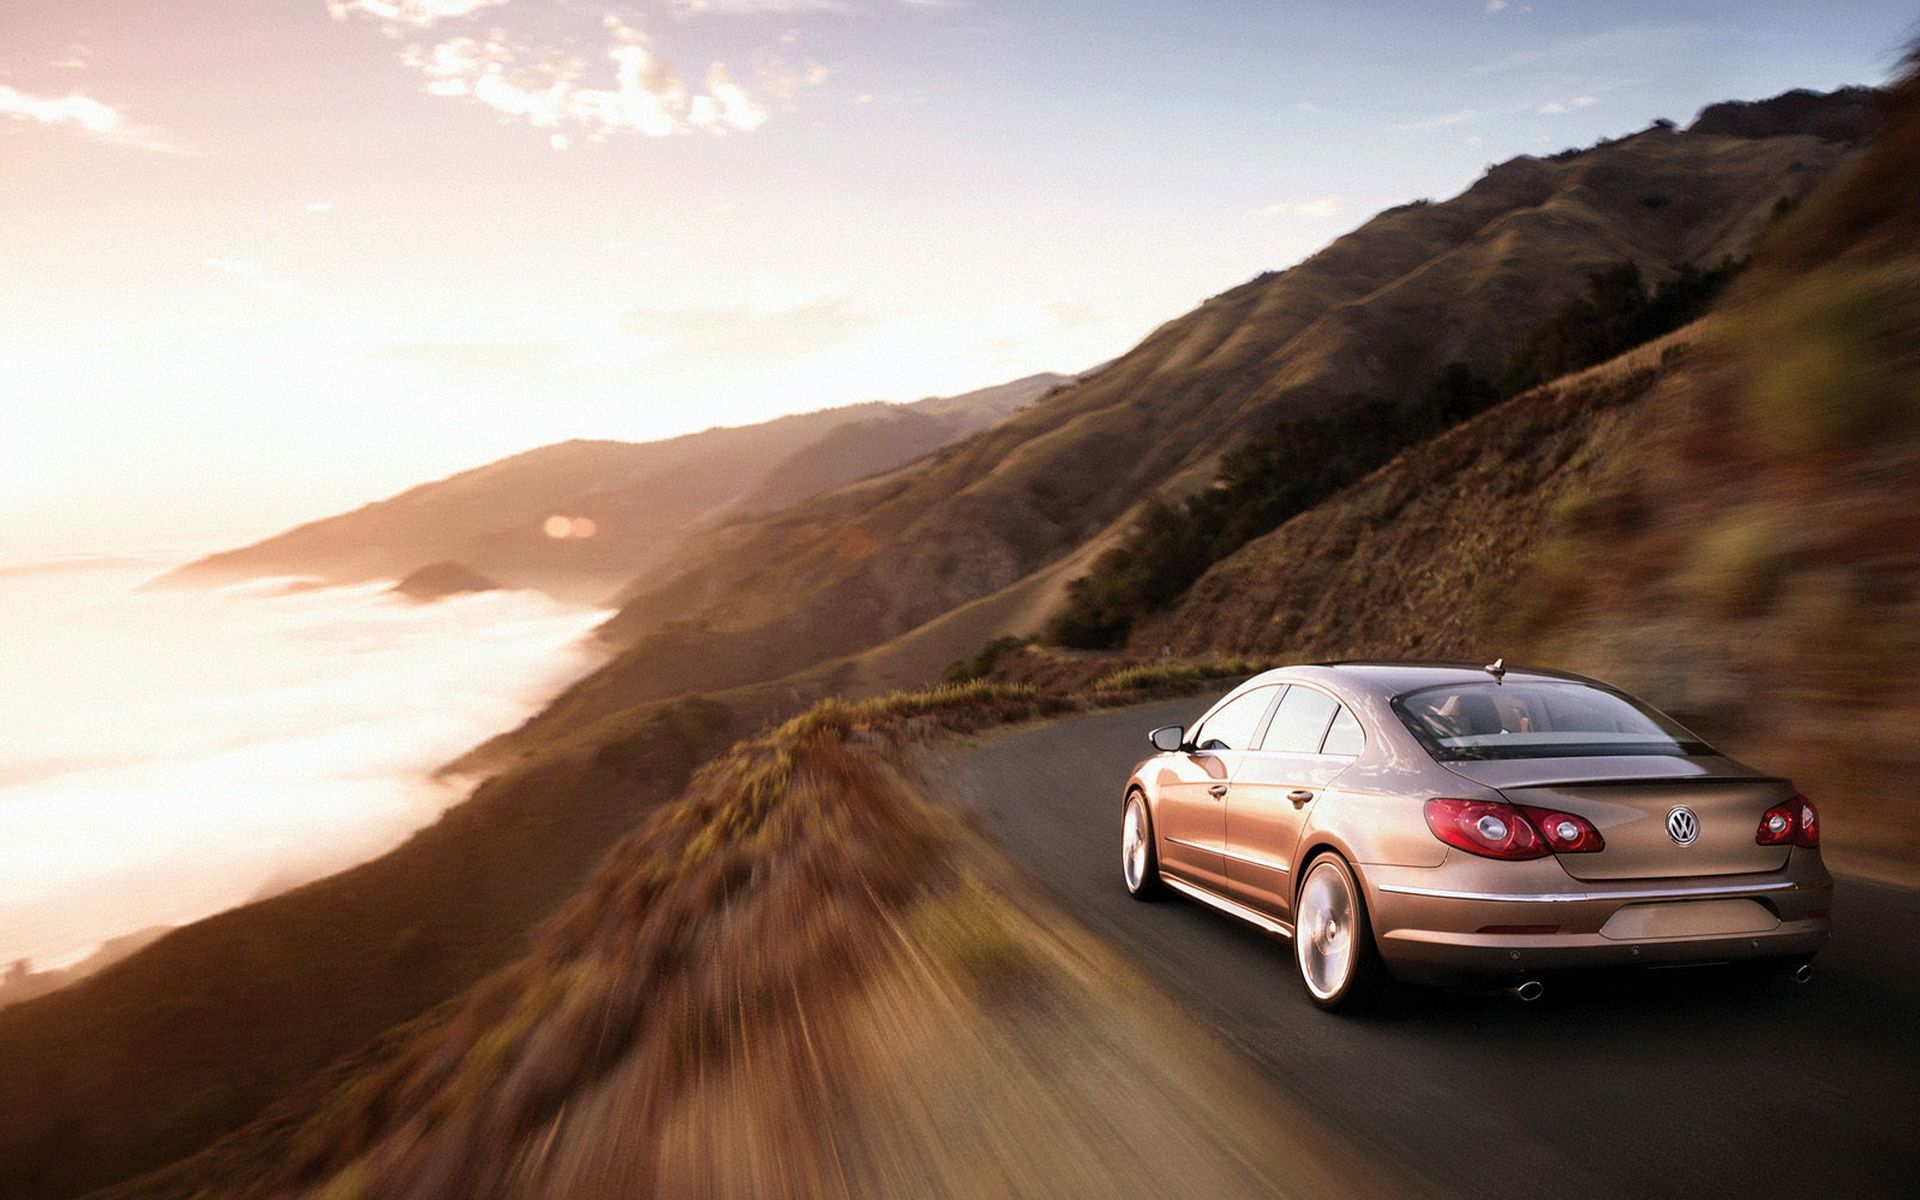 Volkswagen Passat CC Gold Coast Edition wallpaper and image, picture, photo